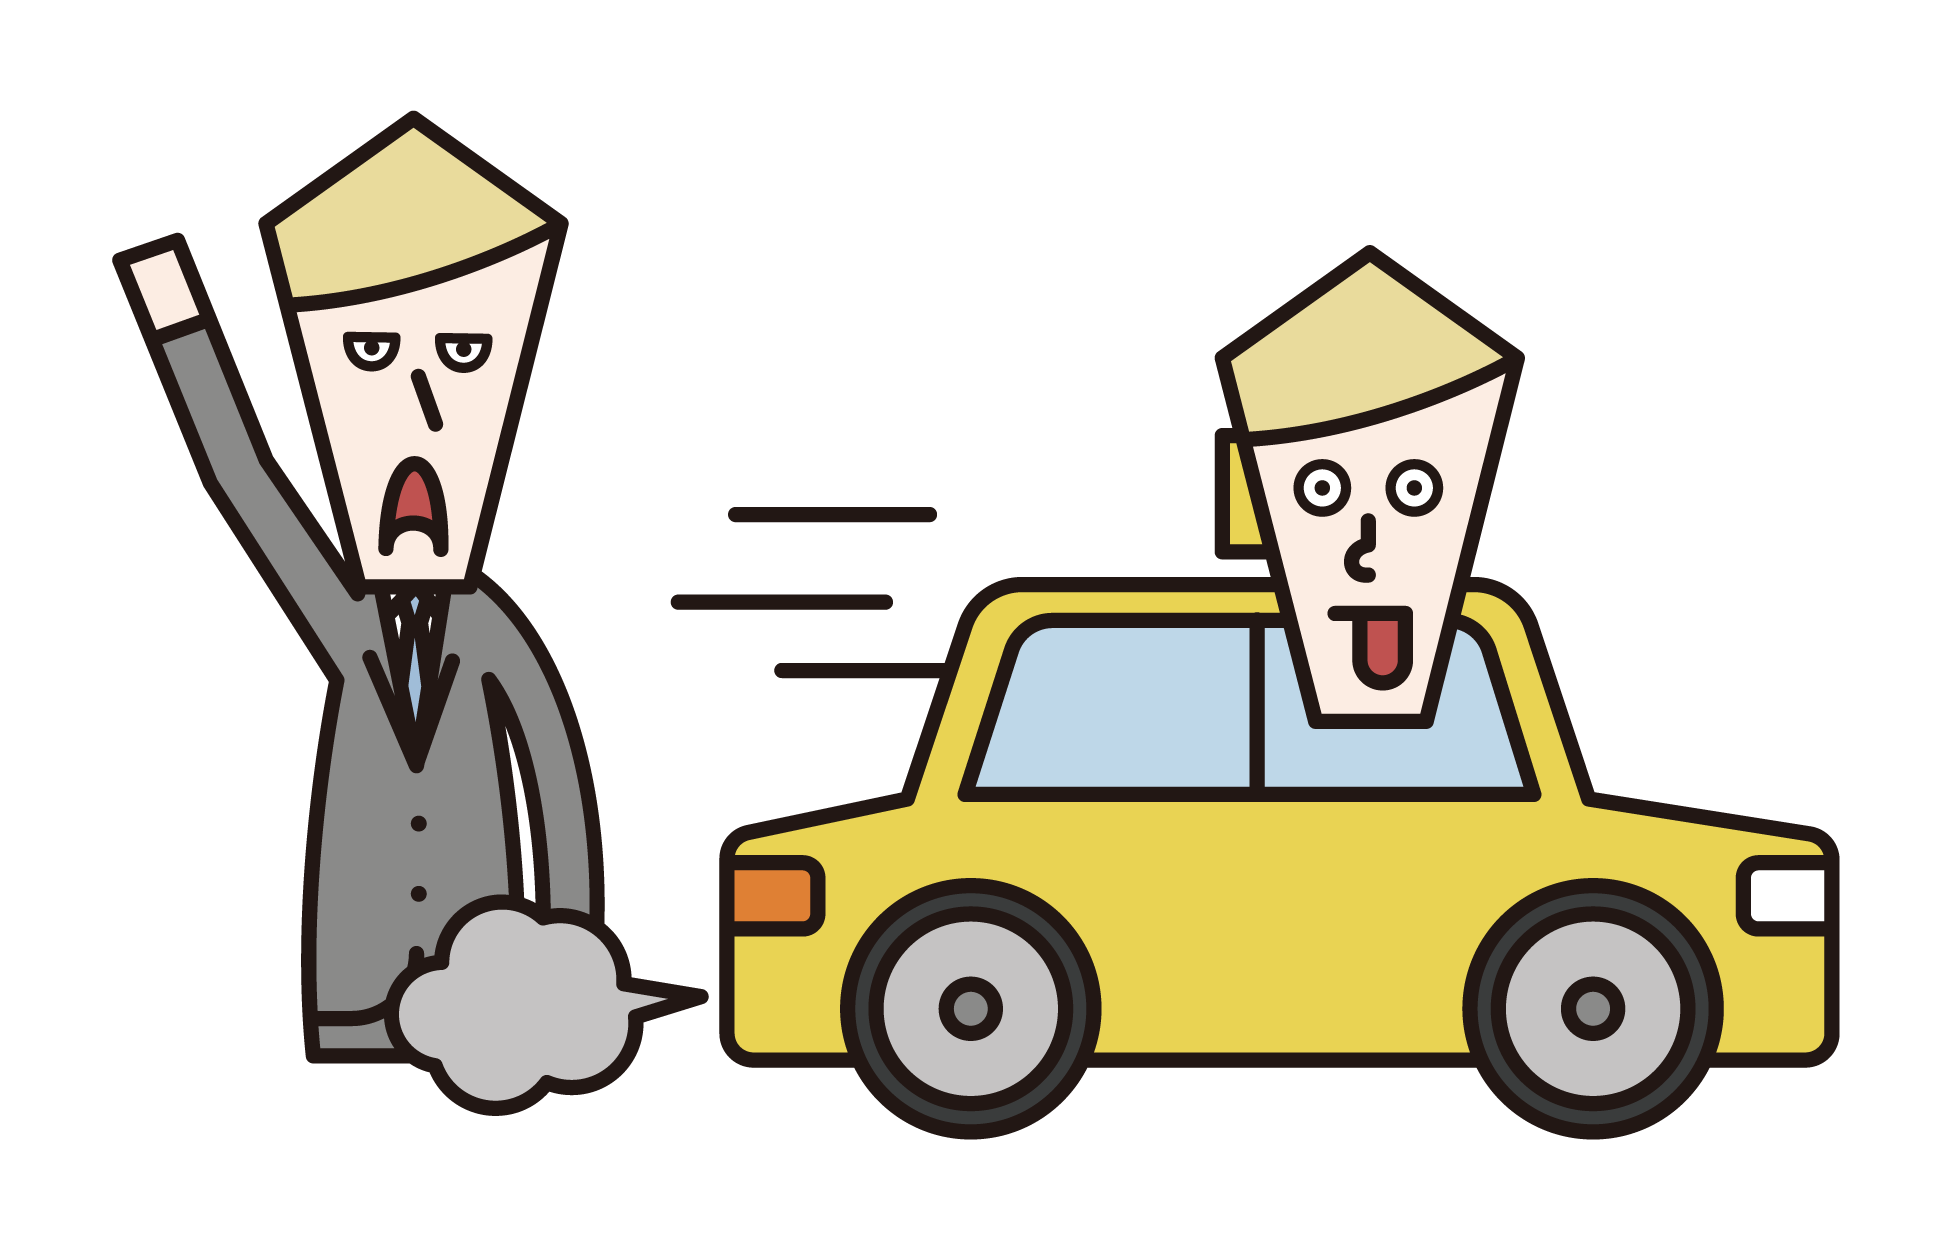 Illustration of a man who failed to catch a taxi